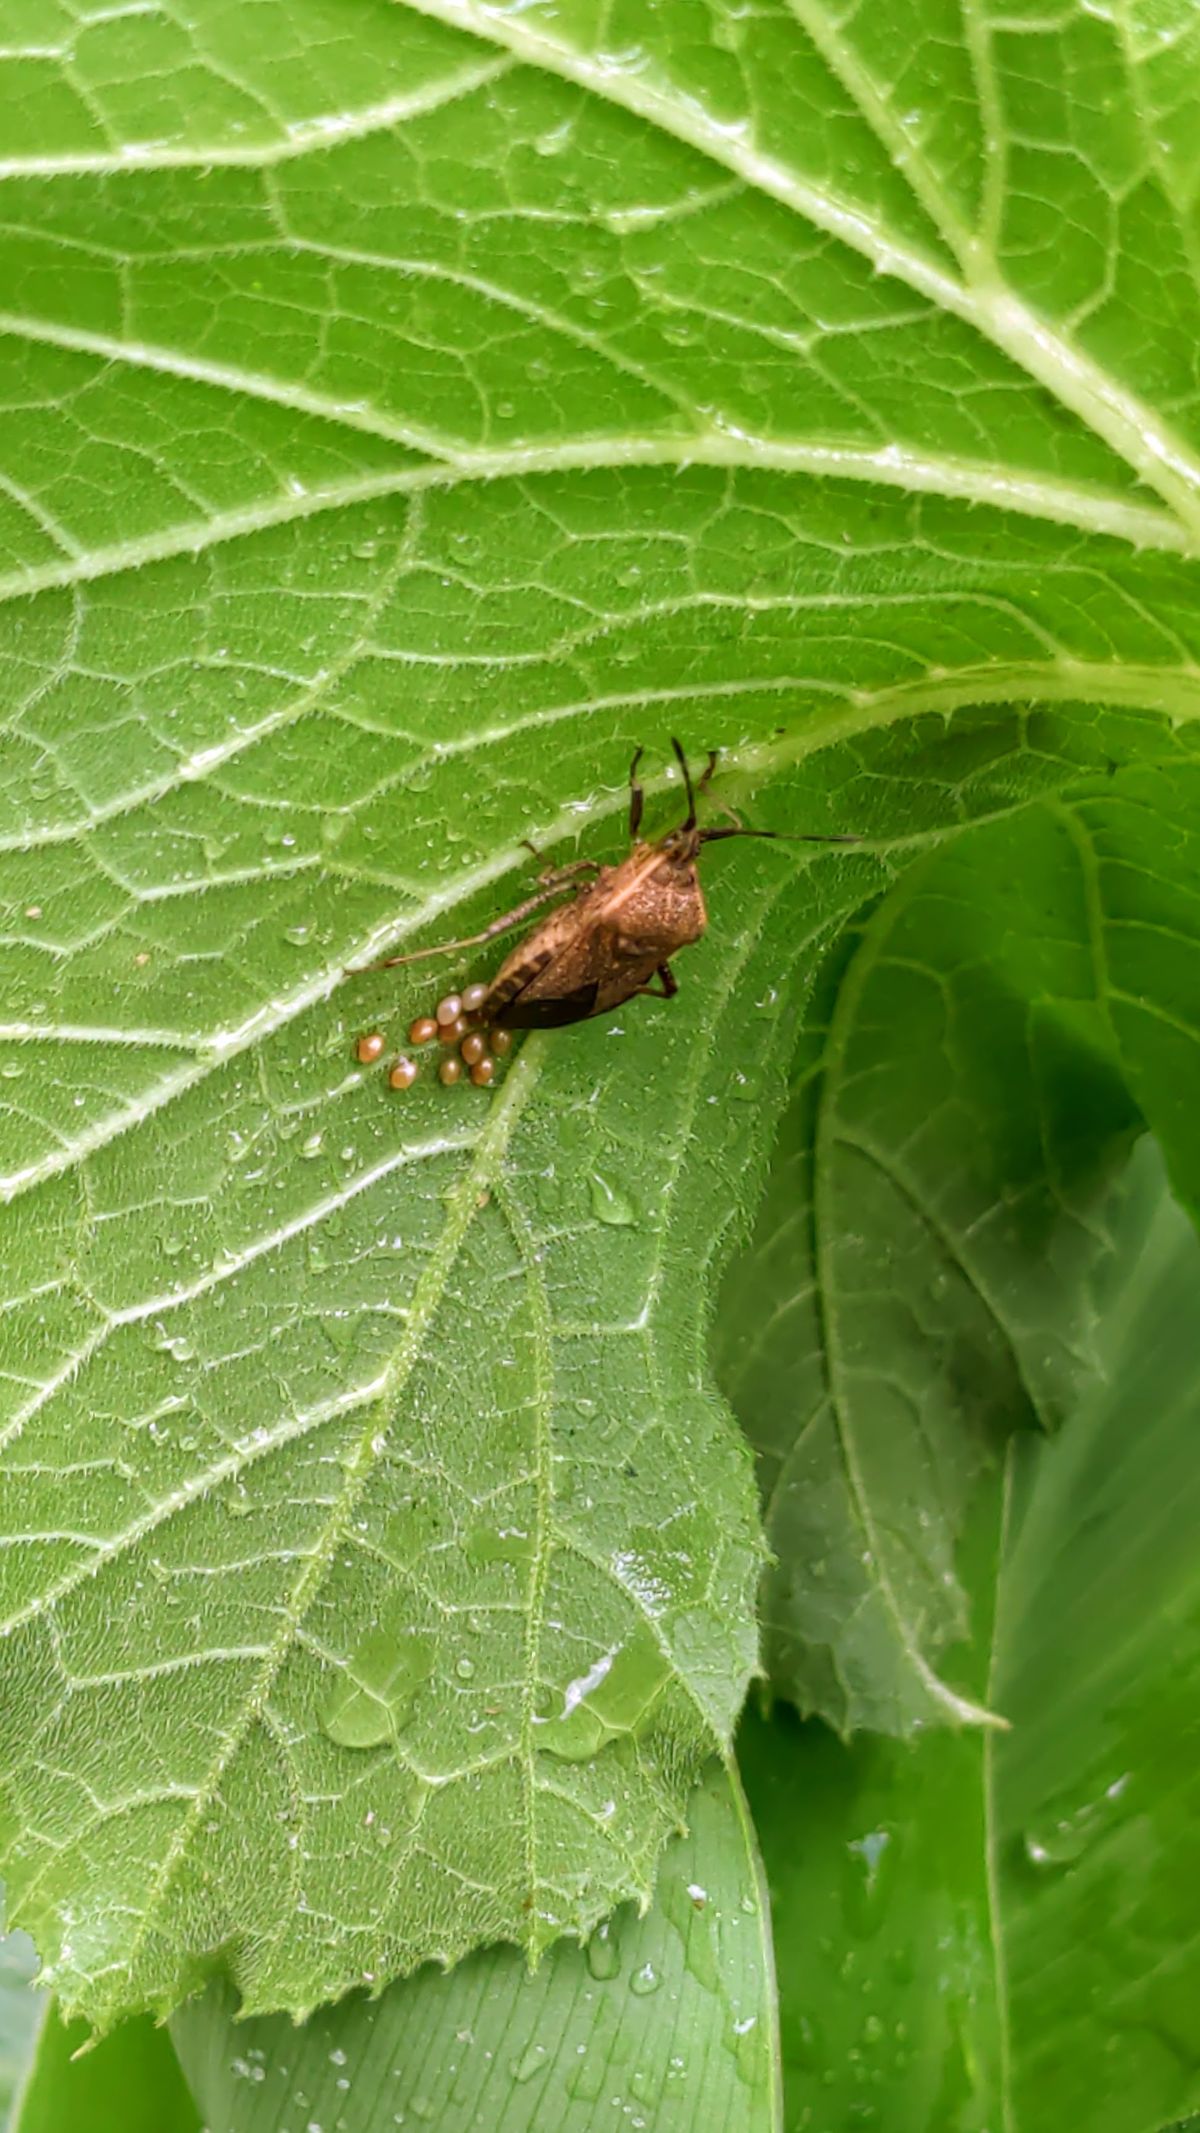 An adult squash bug lays eggs on the underside of a zucchini leaf.